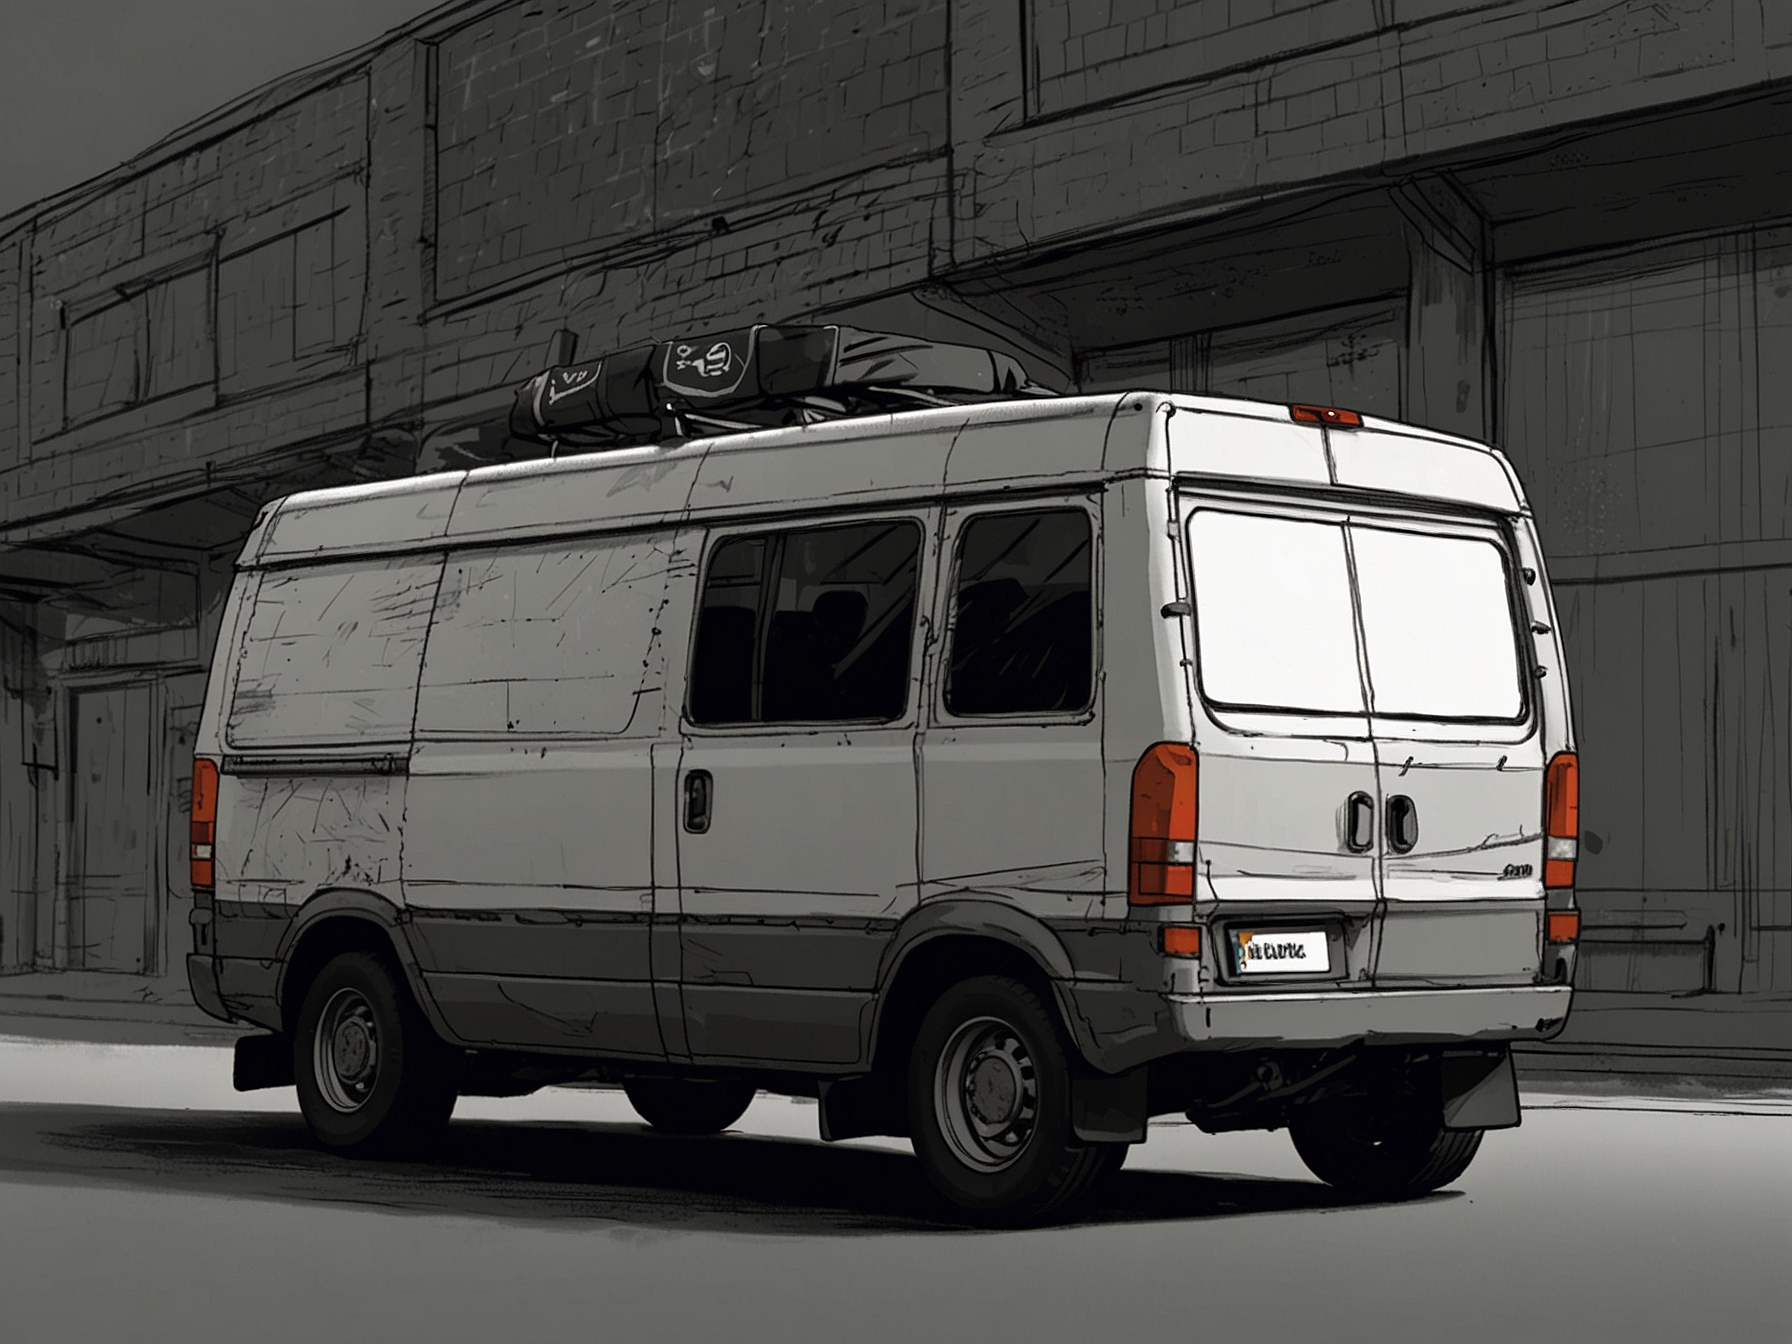 An image depicting a Ninja Van delivery vehicle, symbolizing the company's strategic shift towards enhancing B2B restocking services in the competitive logistics market.